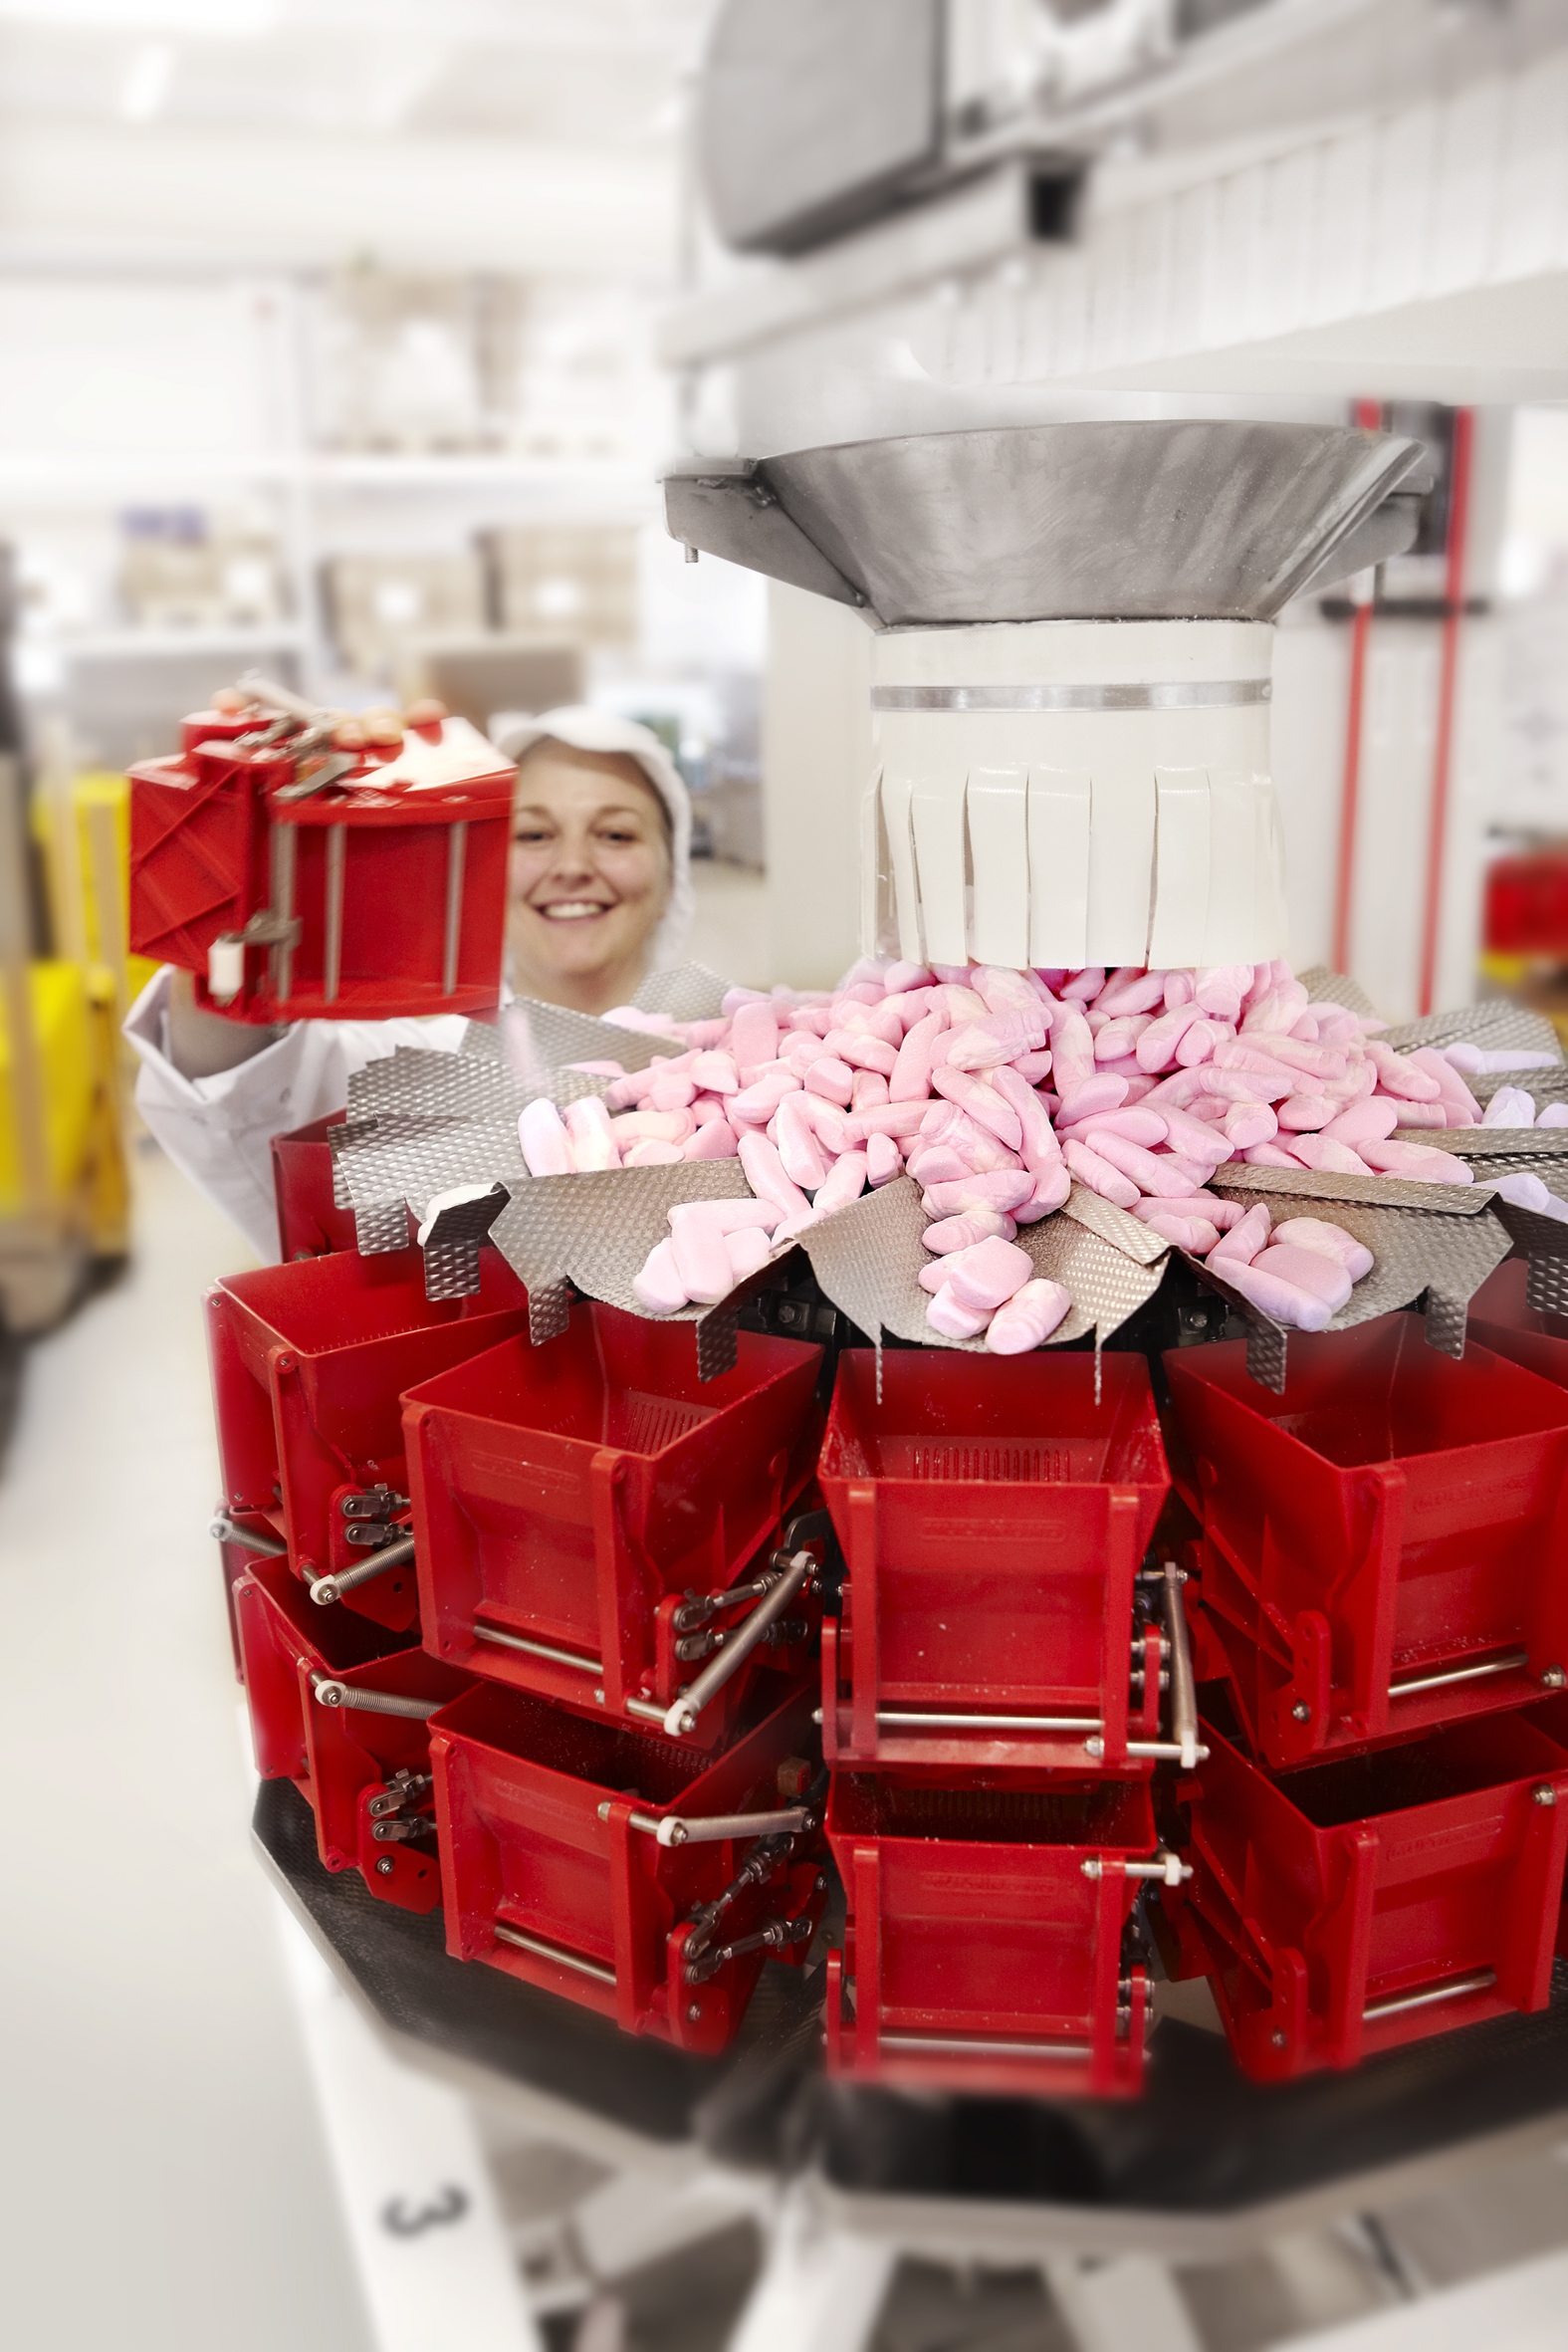 photo of a candy maker smiling for the camera